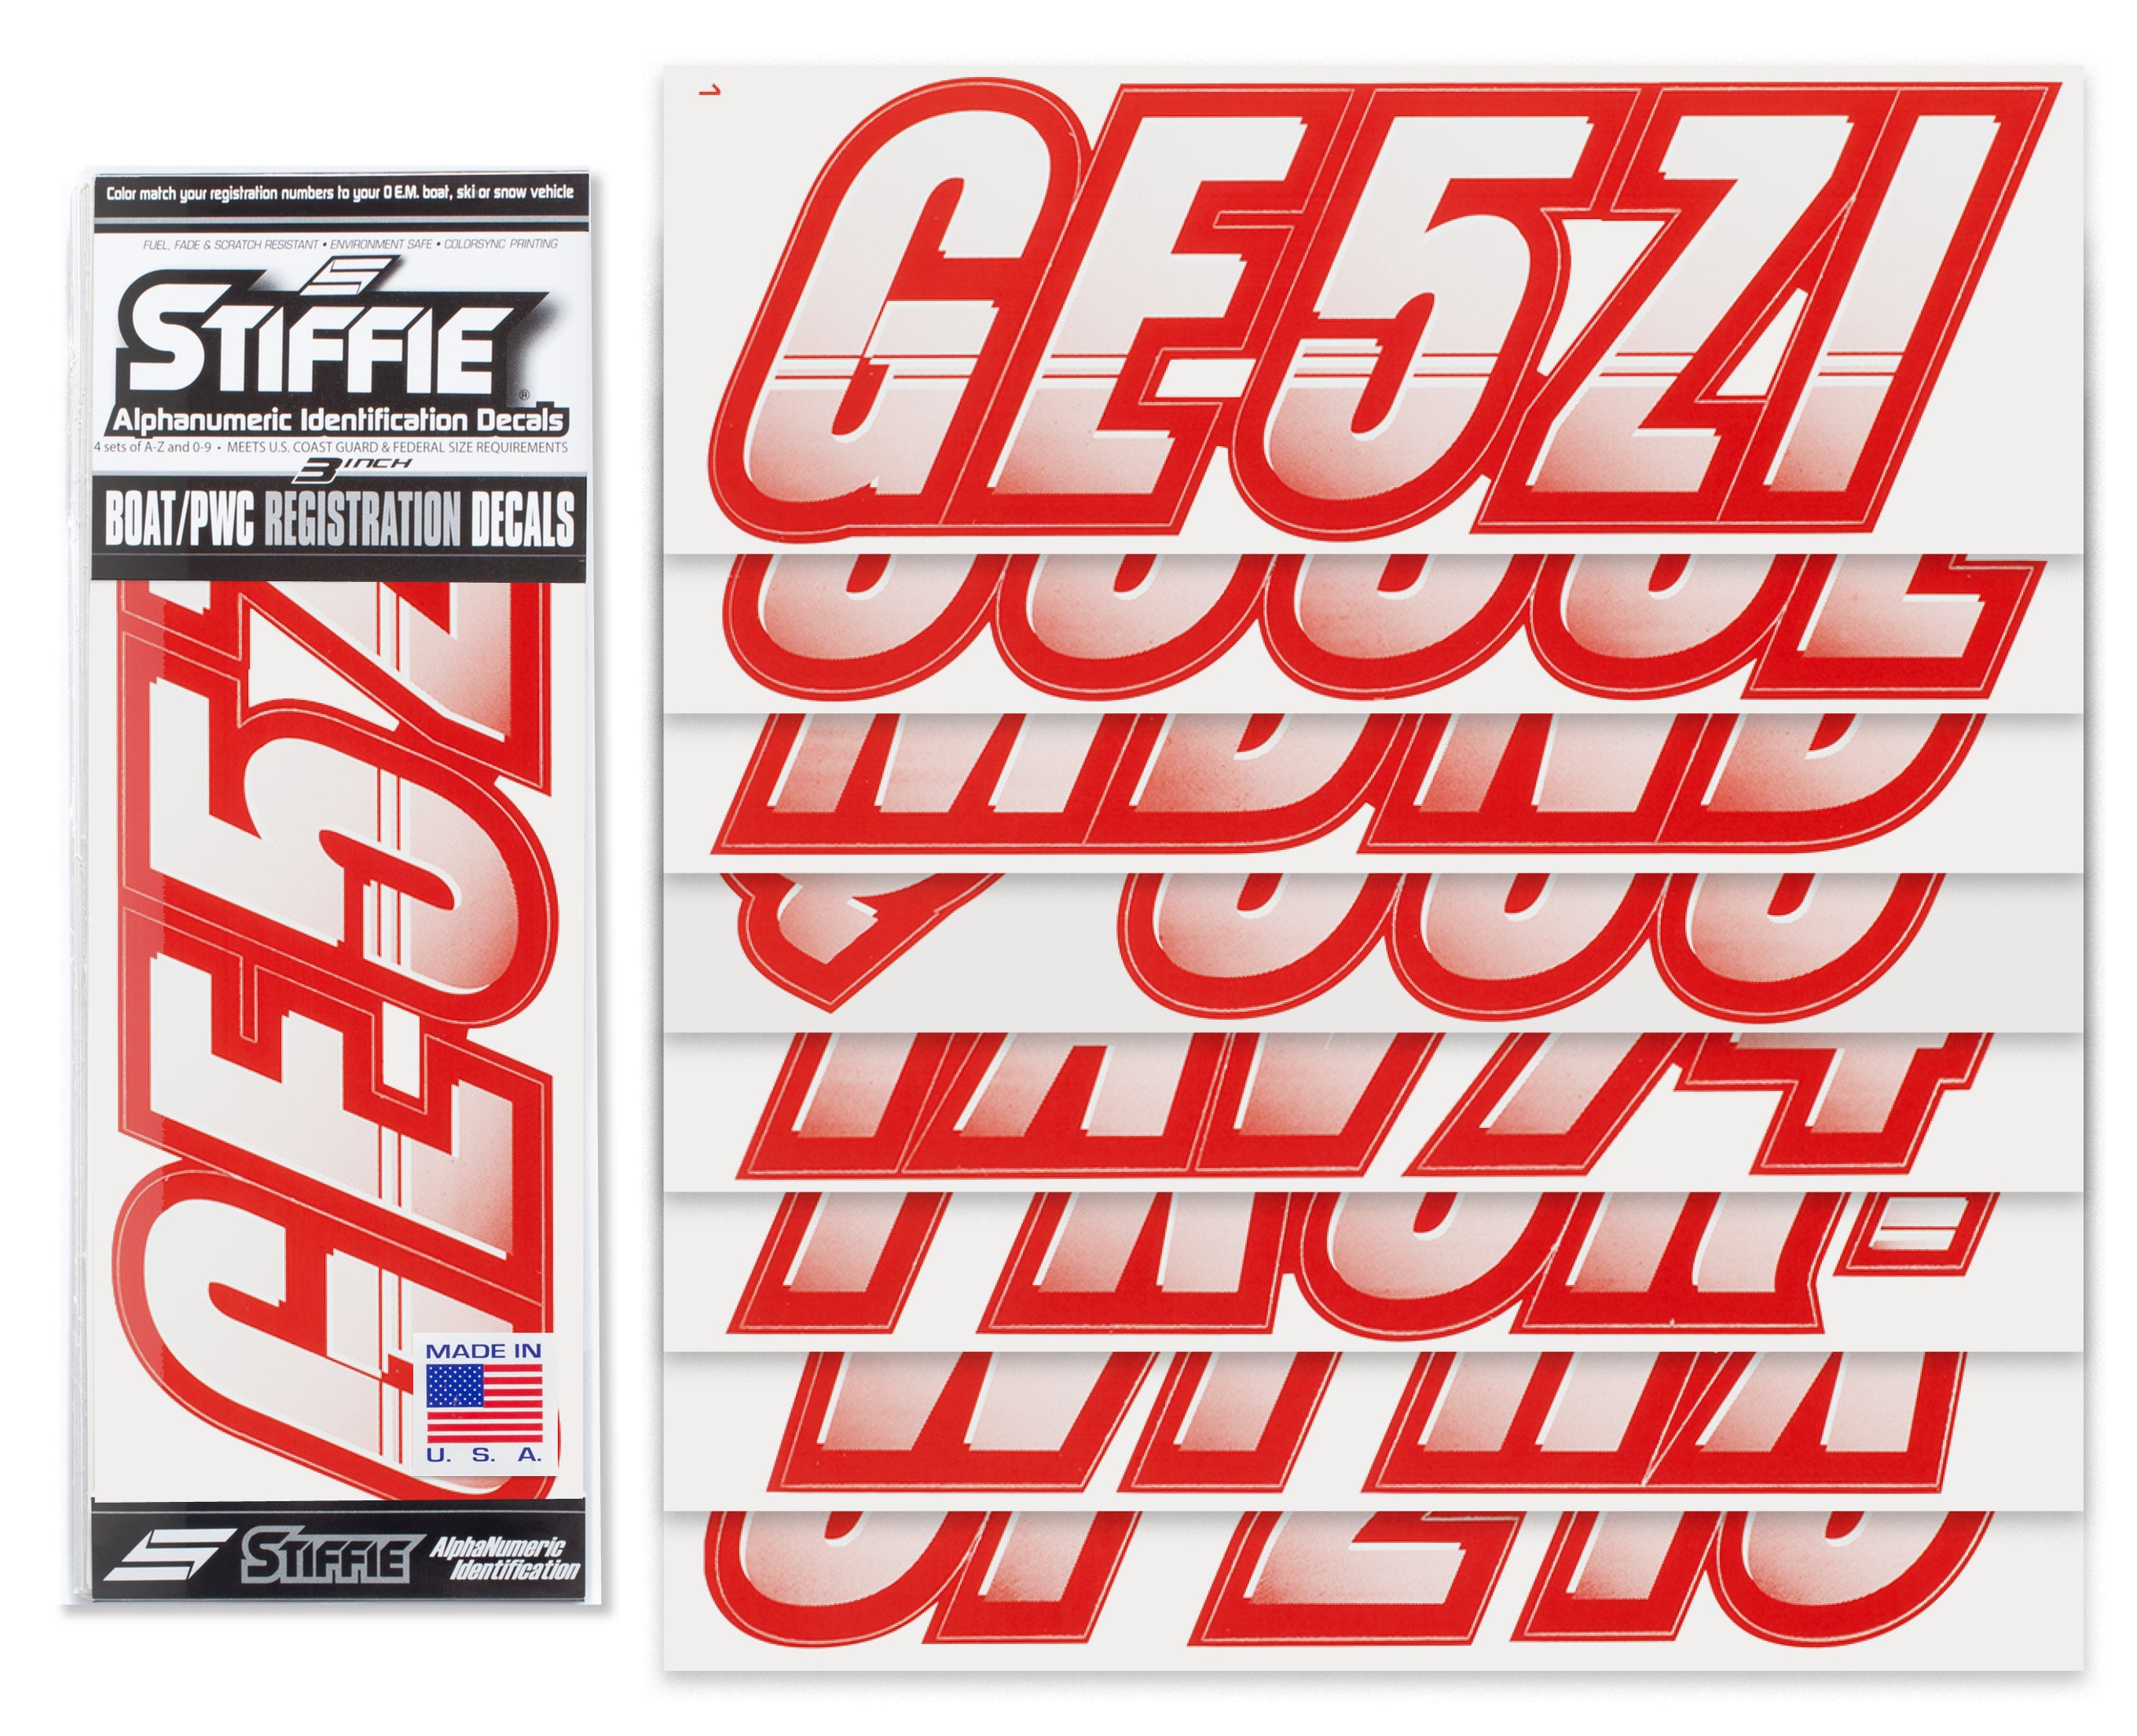 STIFFIE Techtron White/Red 3" Alpha-Numeric Registration Identification Numbers Stickers Decals for Boats & Personal Watercraft